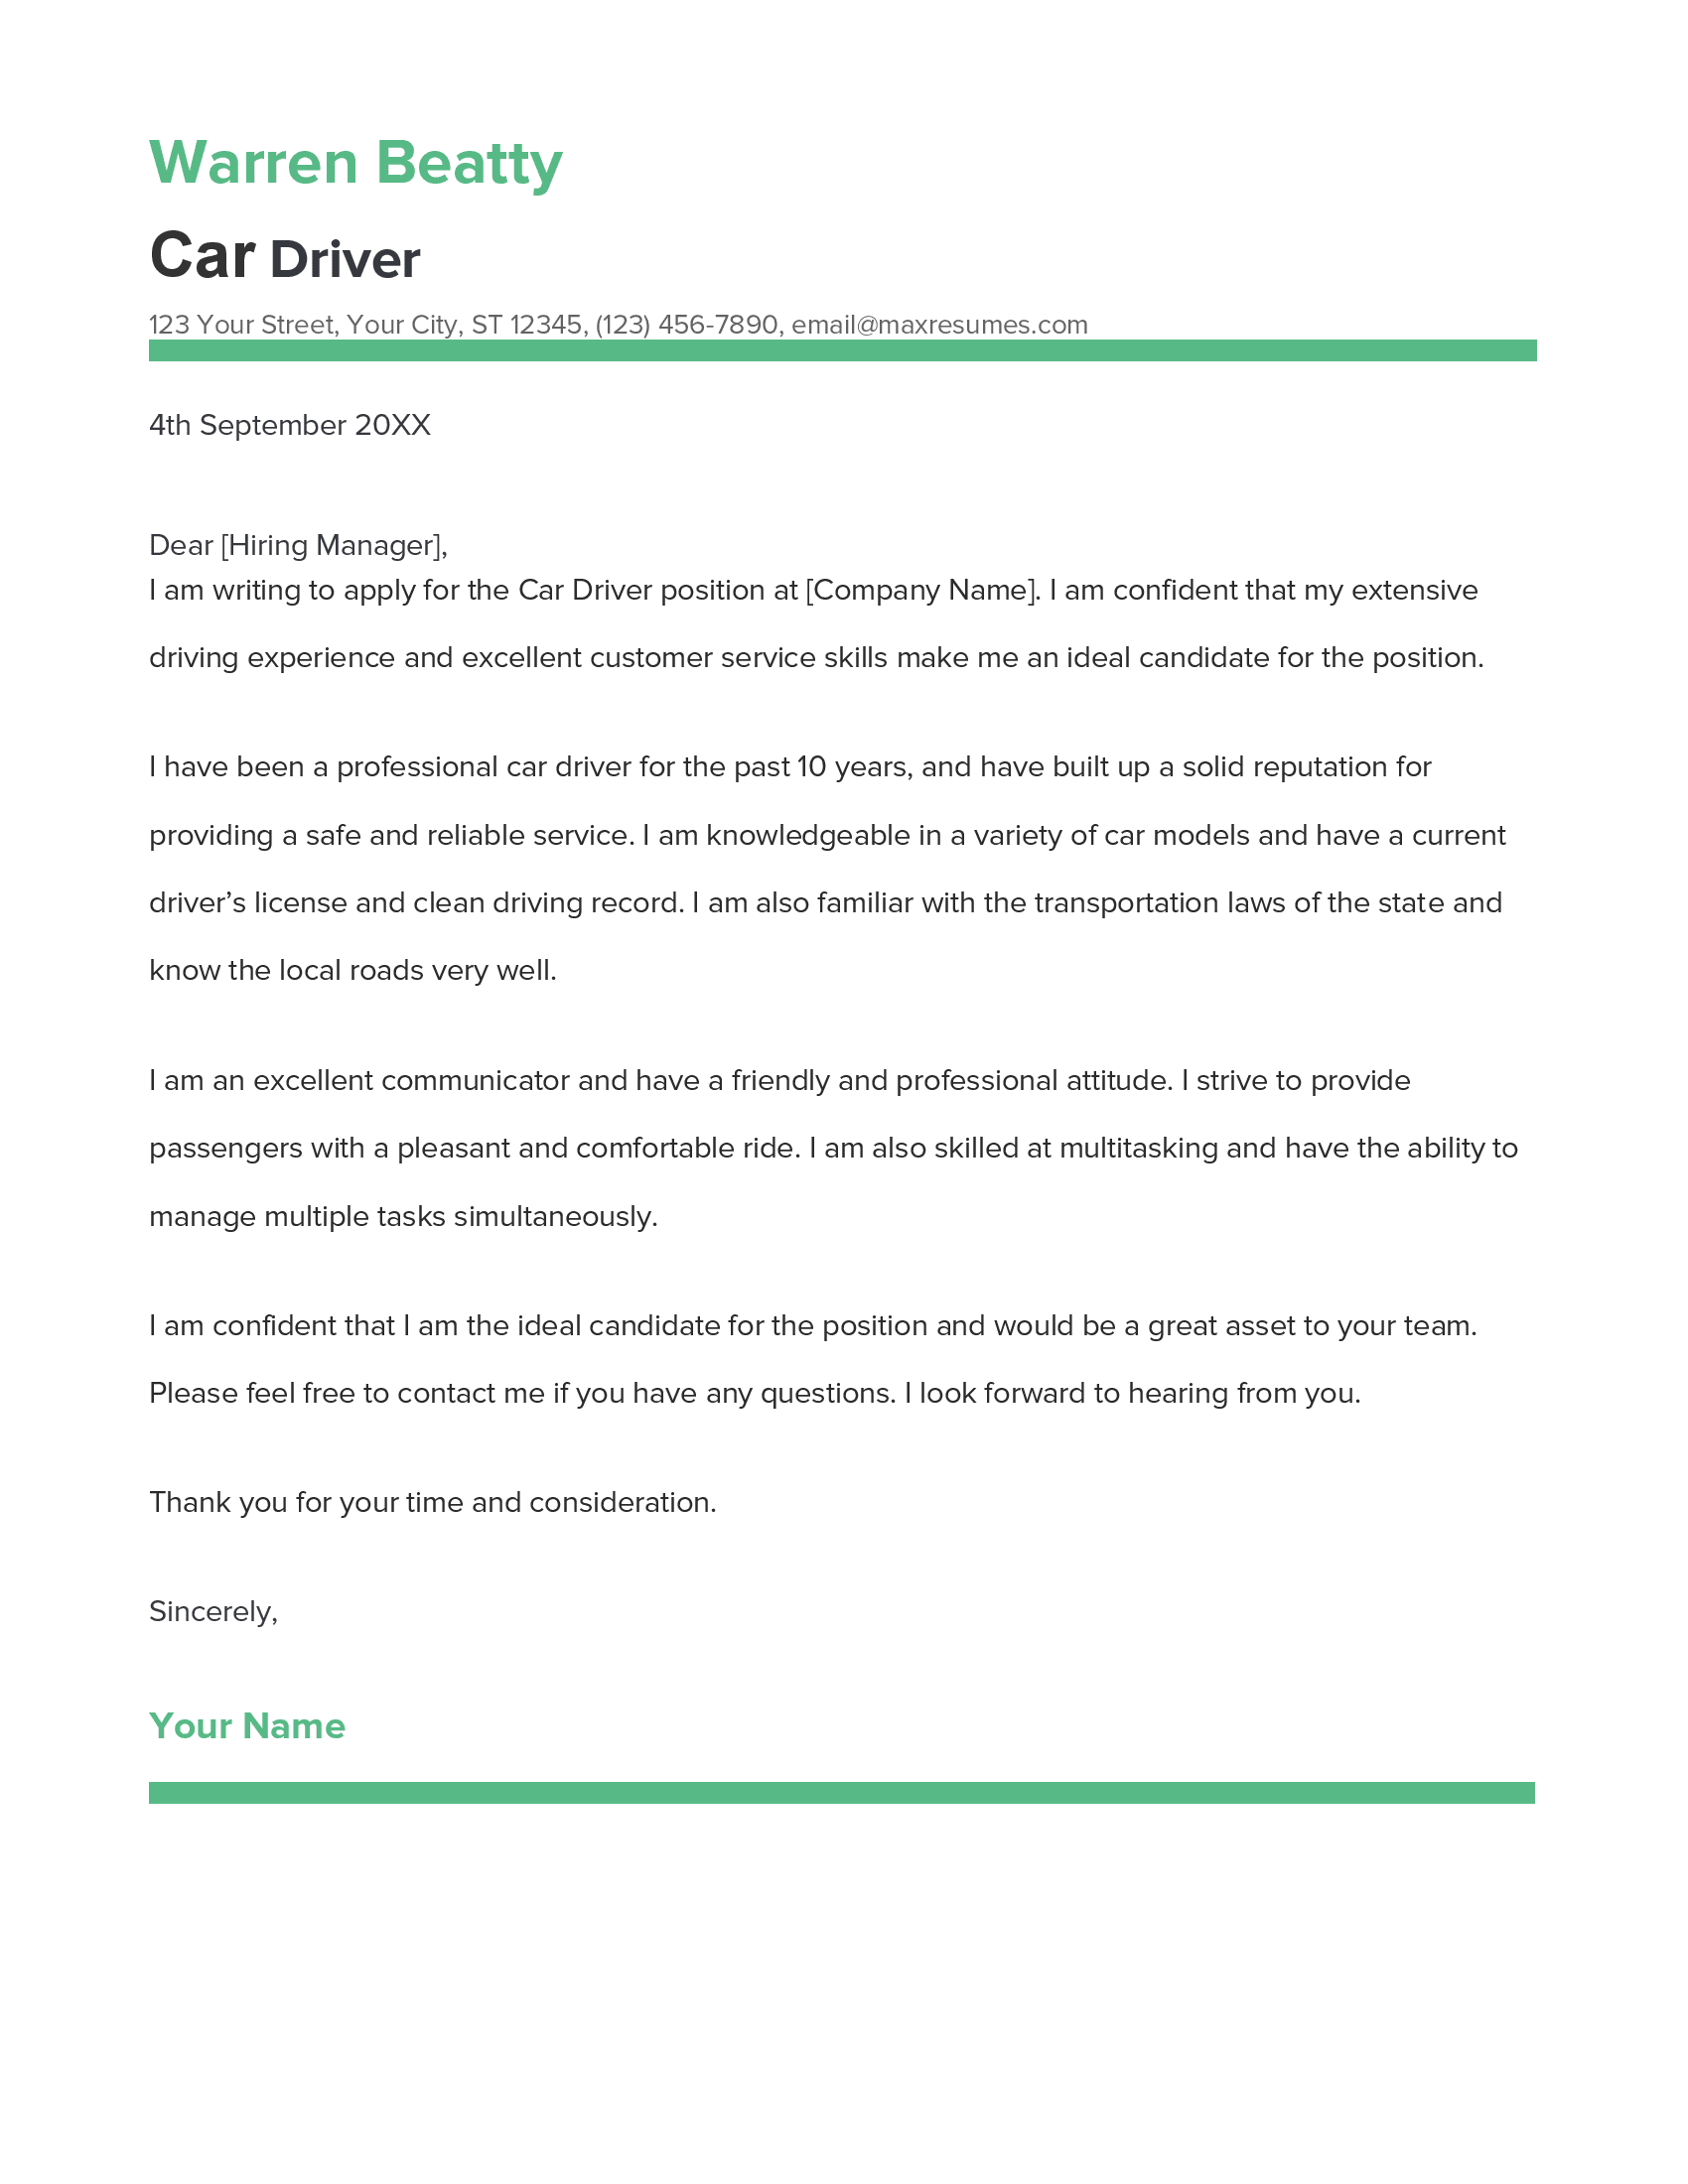 Car Driver Cover Letter Example